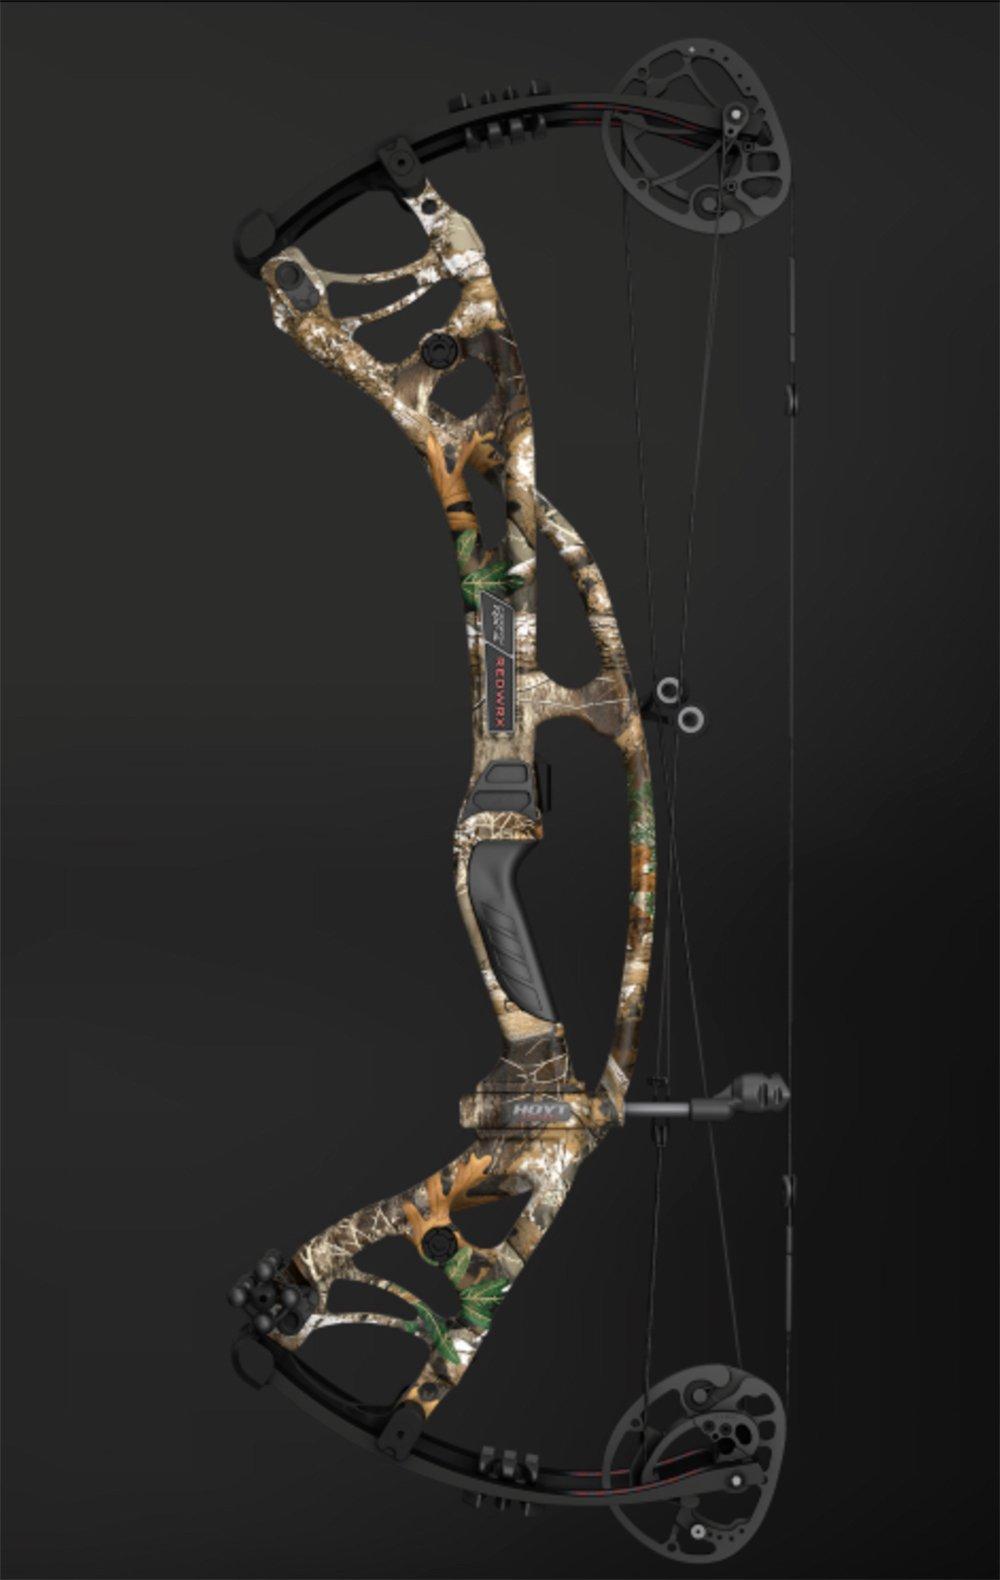 Speed bows like this Hoyt RX-4 Turbo have shorter brace heights and can be more demanding to draw, but the performance payoff is worth it. Image by Hoyt